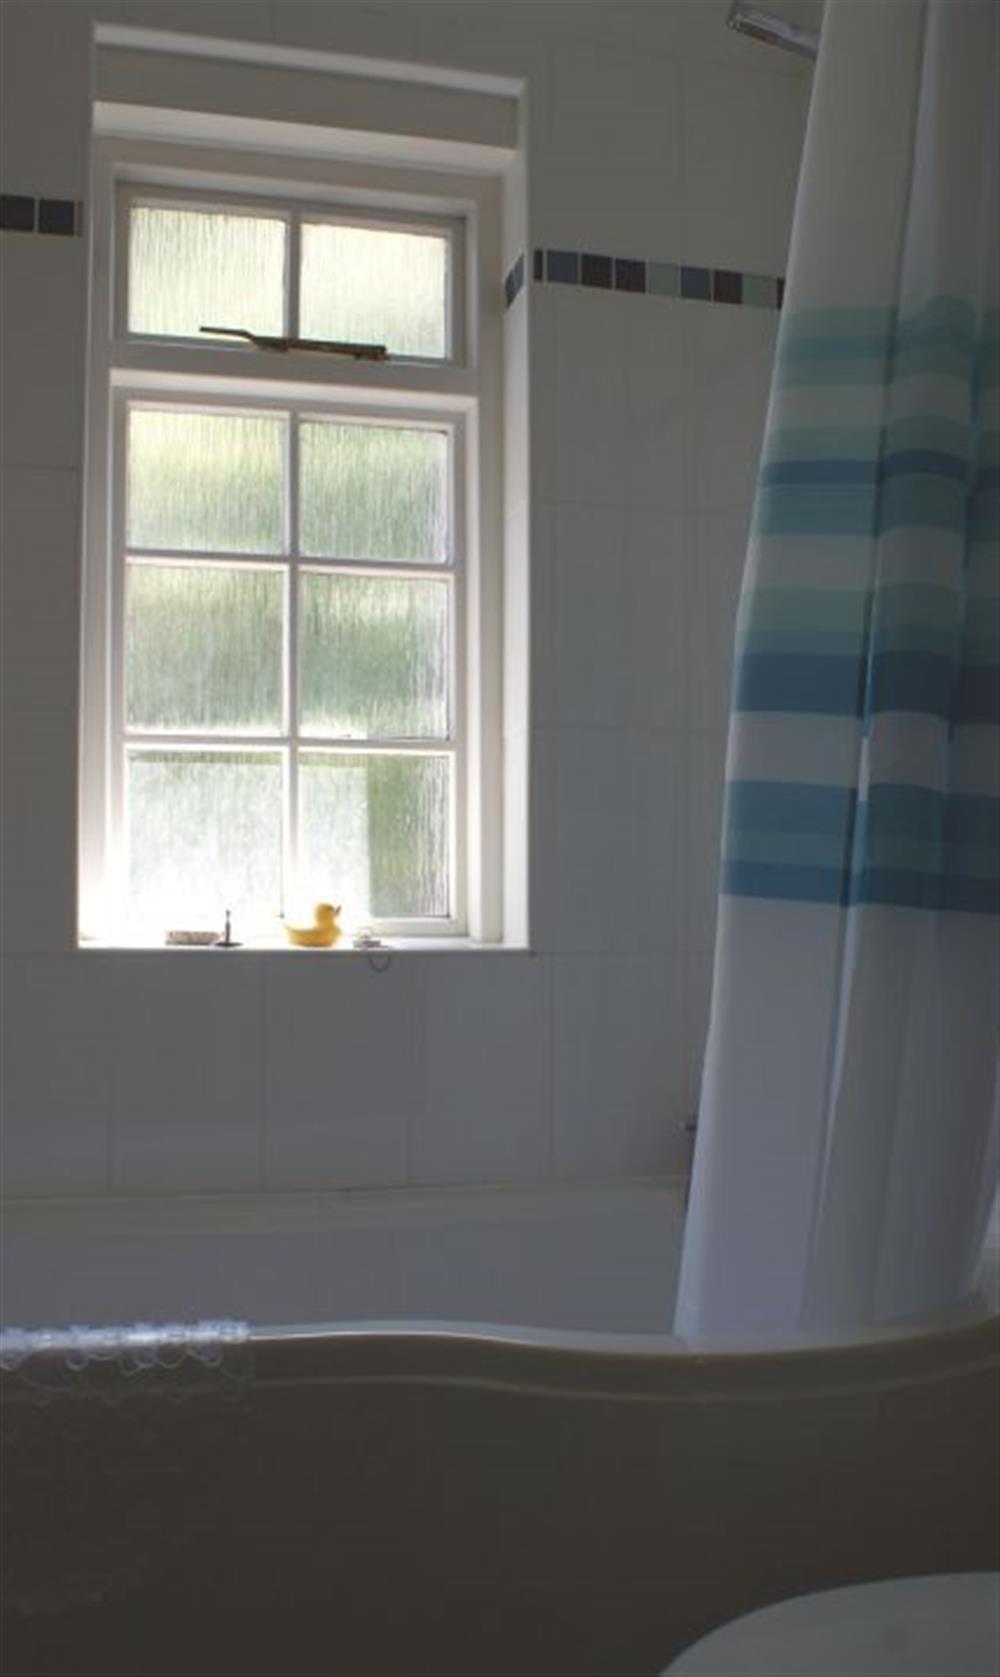 Bathroom at The Boathouse, Kingswear, Torbay and the Red Cliffs